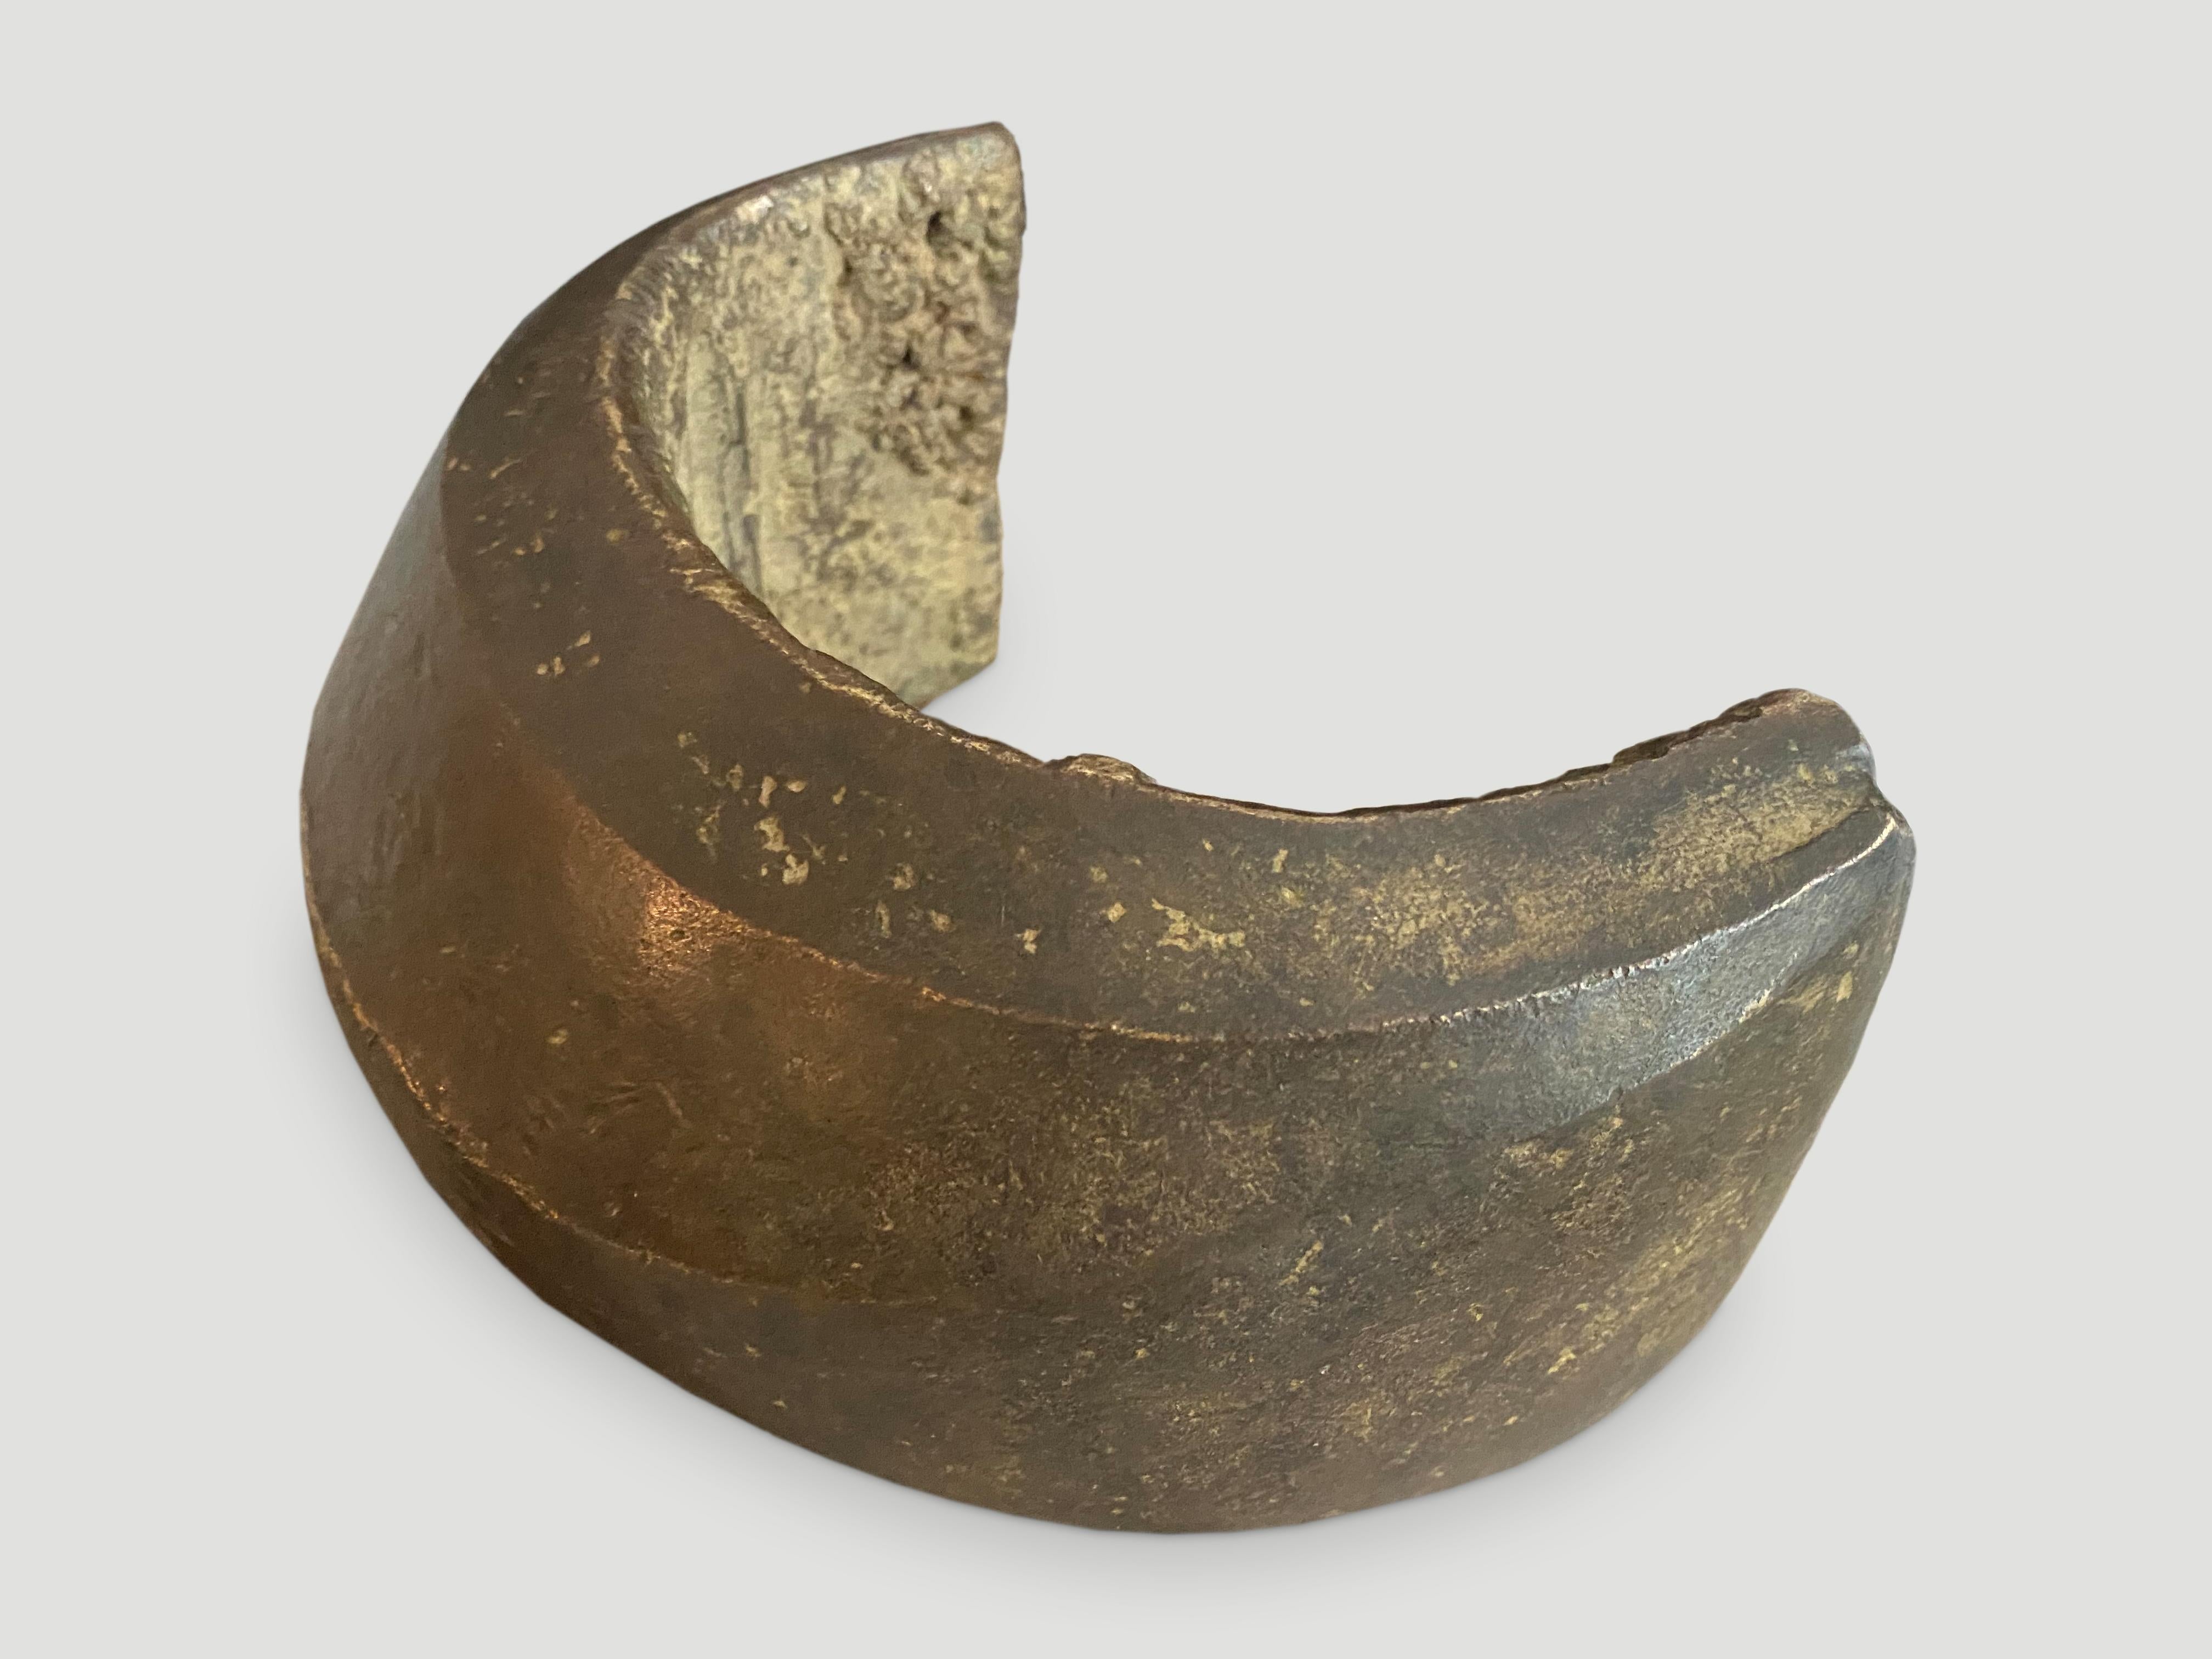 Beautiful antique African art object originally used as currency. Lovely patina and shape on this rare solid piece that could also be put on a stand.

This African currency was sourced in the spirit of wabi-sabi, a Japanese philosophy that beauty